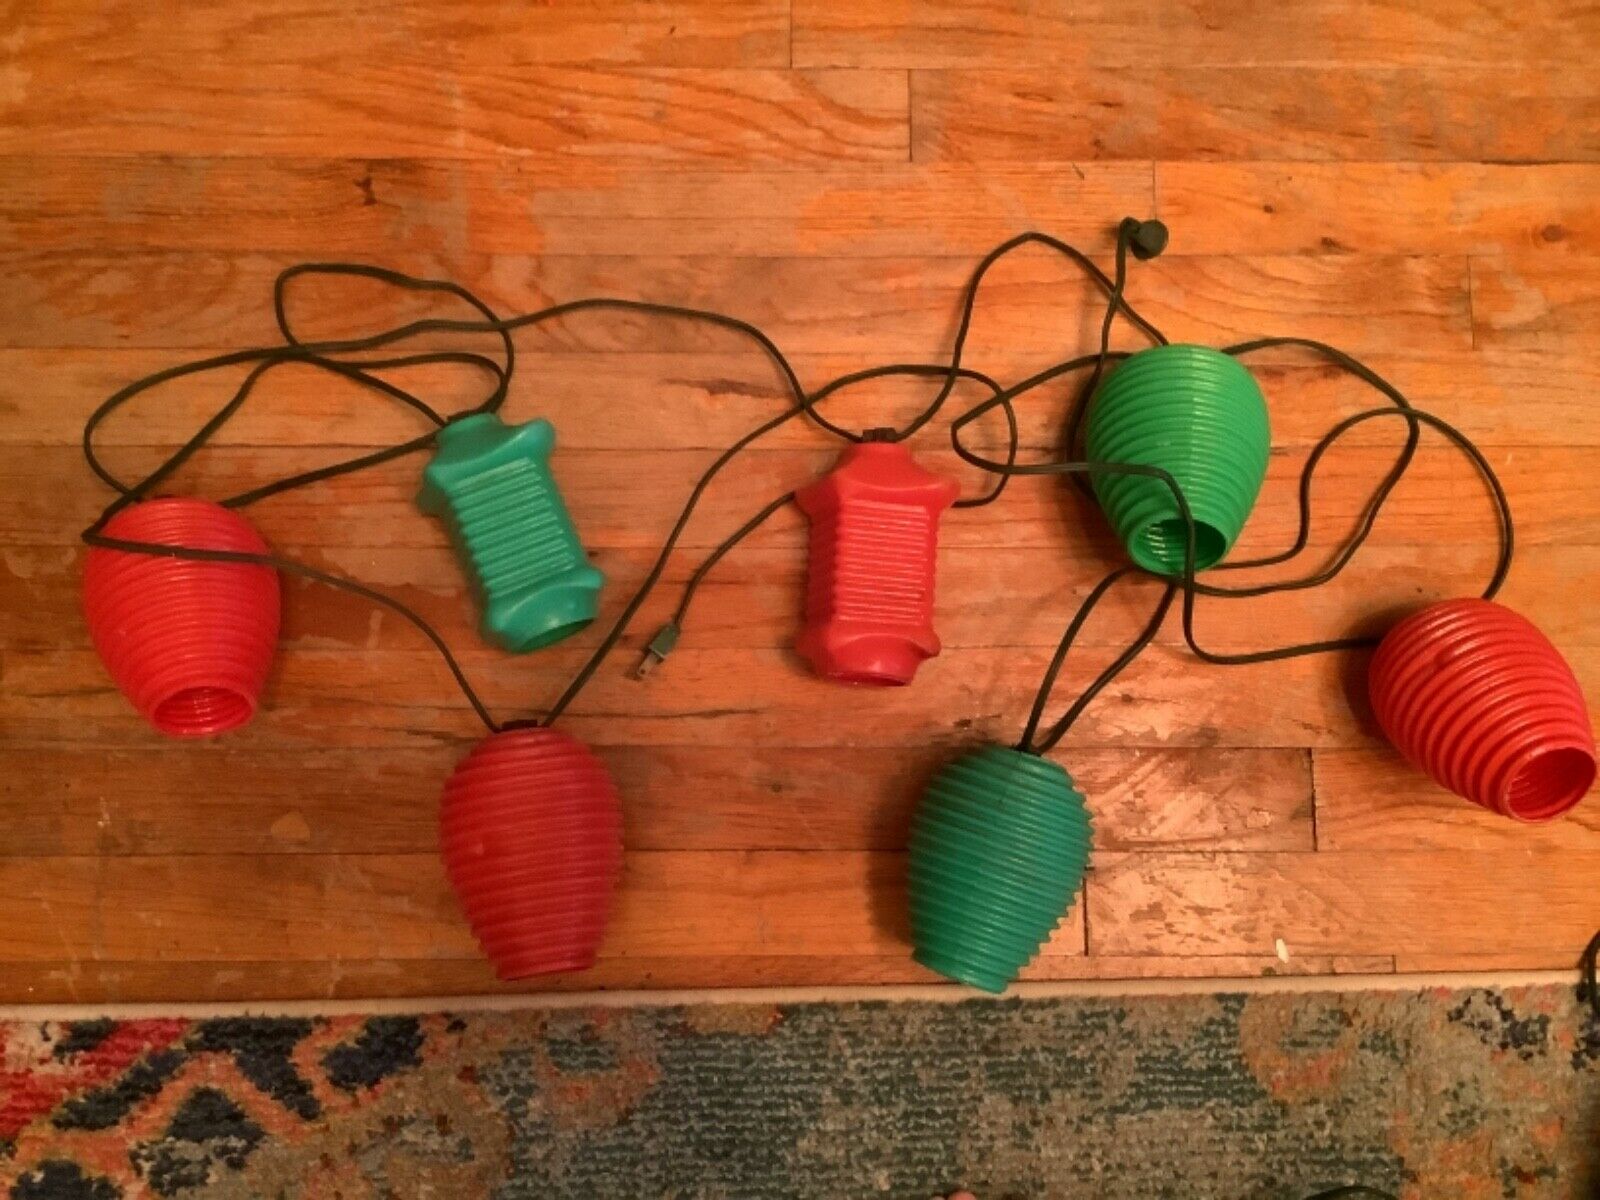 Vintage PATIO PARTY Lantern Camp rv Lights shades Christmas blow mold lot 7